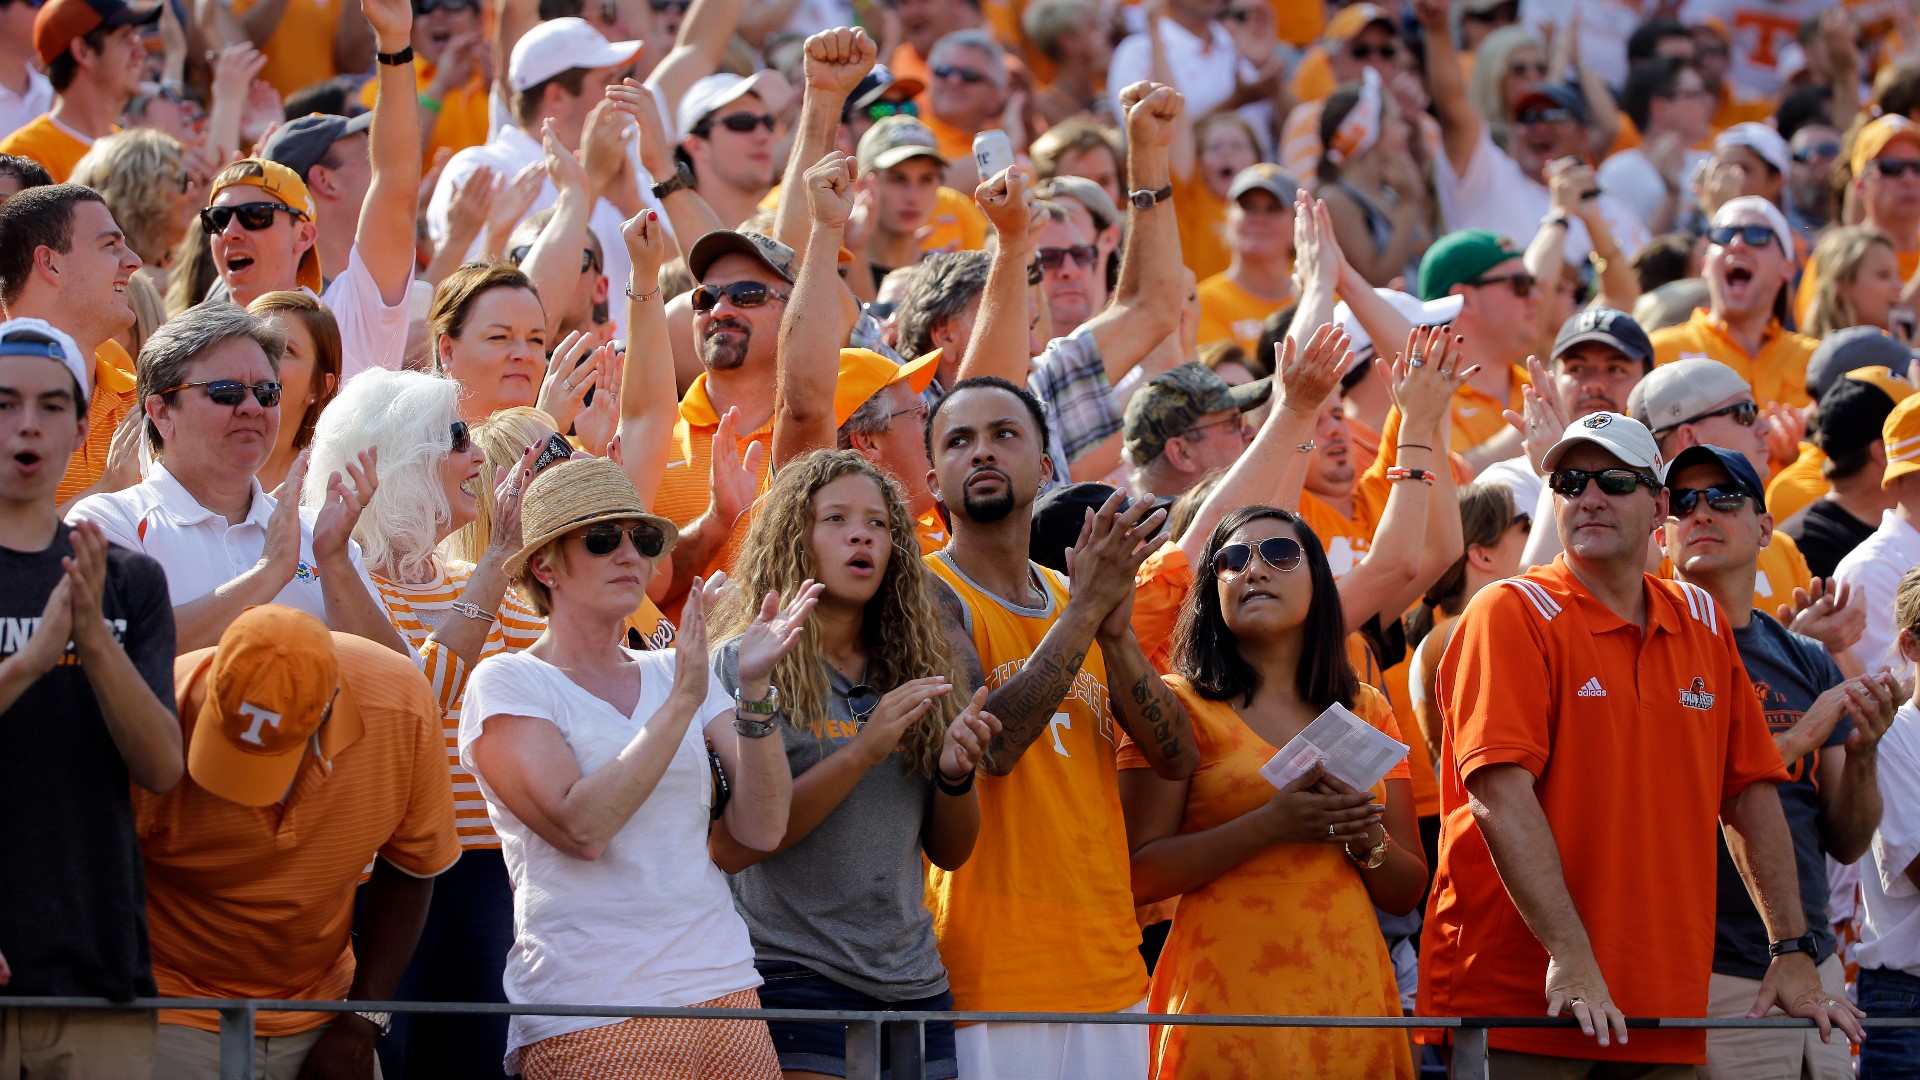 Tennessee's first game of the season against Chattanooga is scheduled for Saturday, Aug. 31 in Neyland Stadium. The time is TBA.